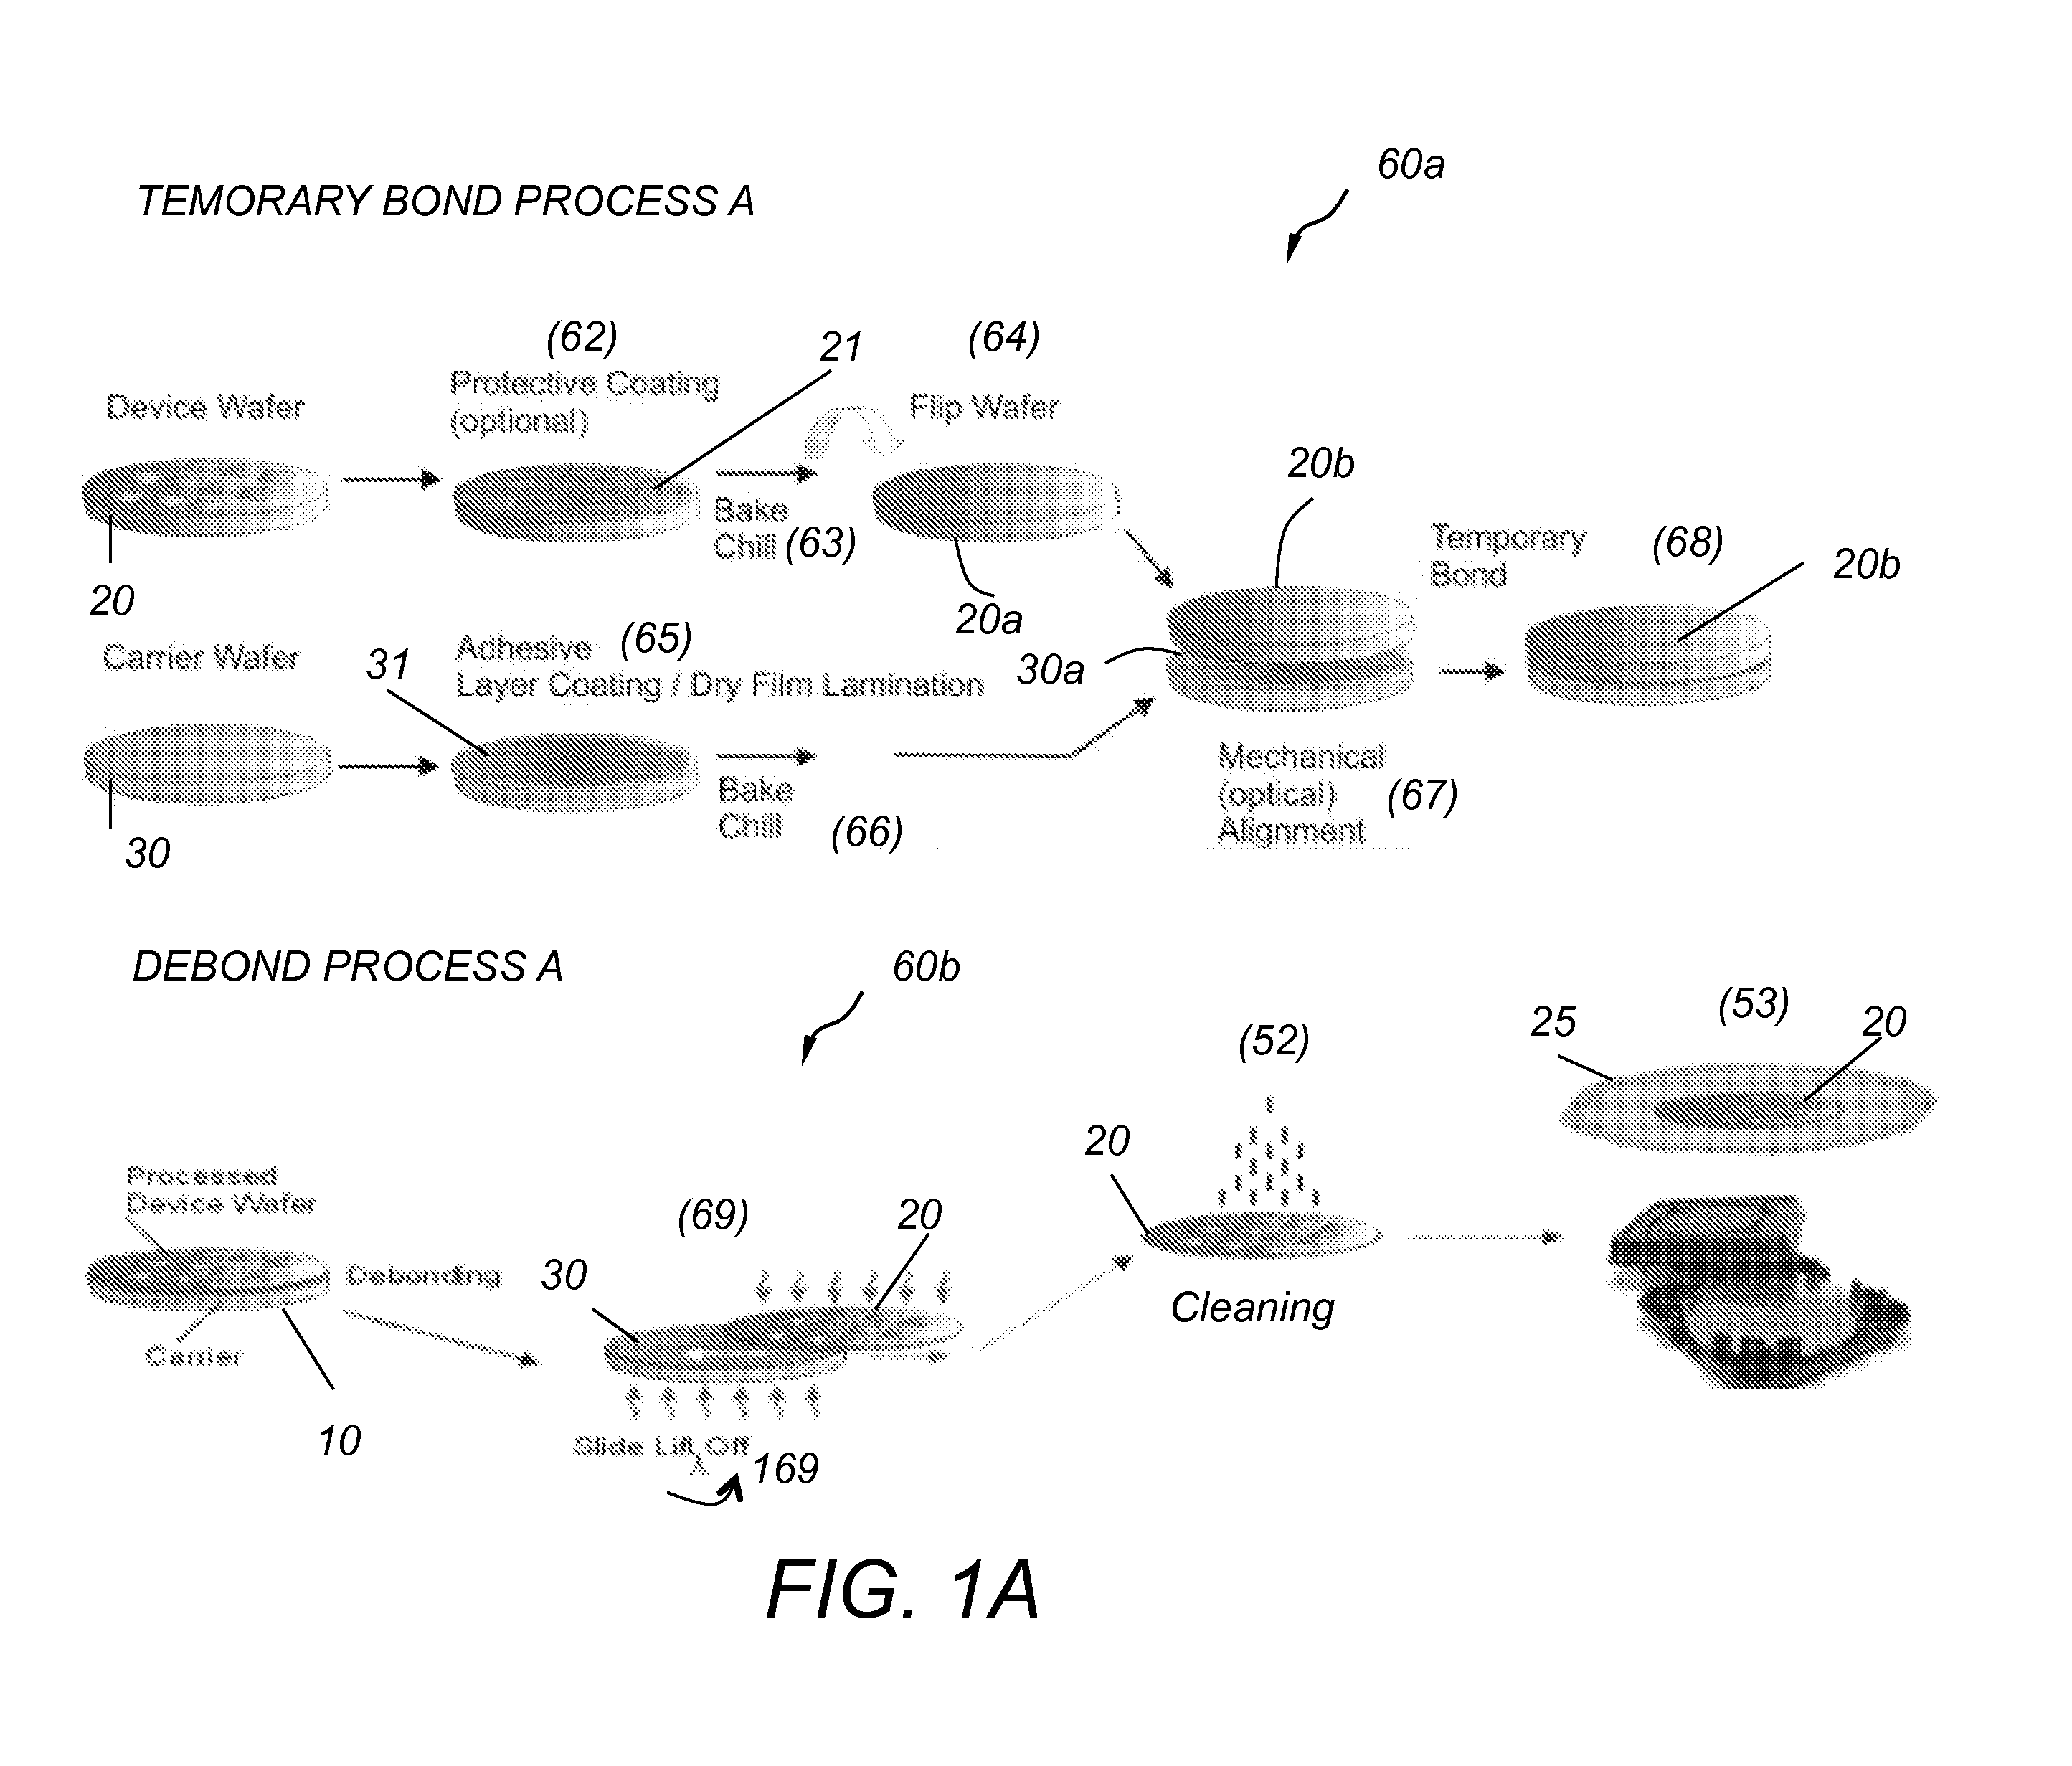 Apparatus for thermal-slide debonding of temporary bonded semiconductor wafers